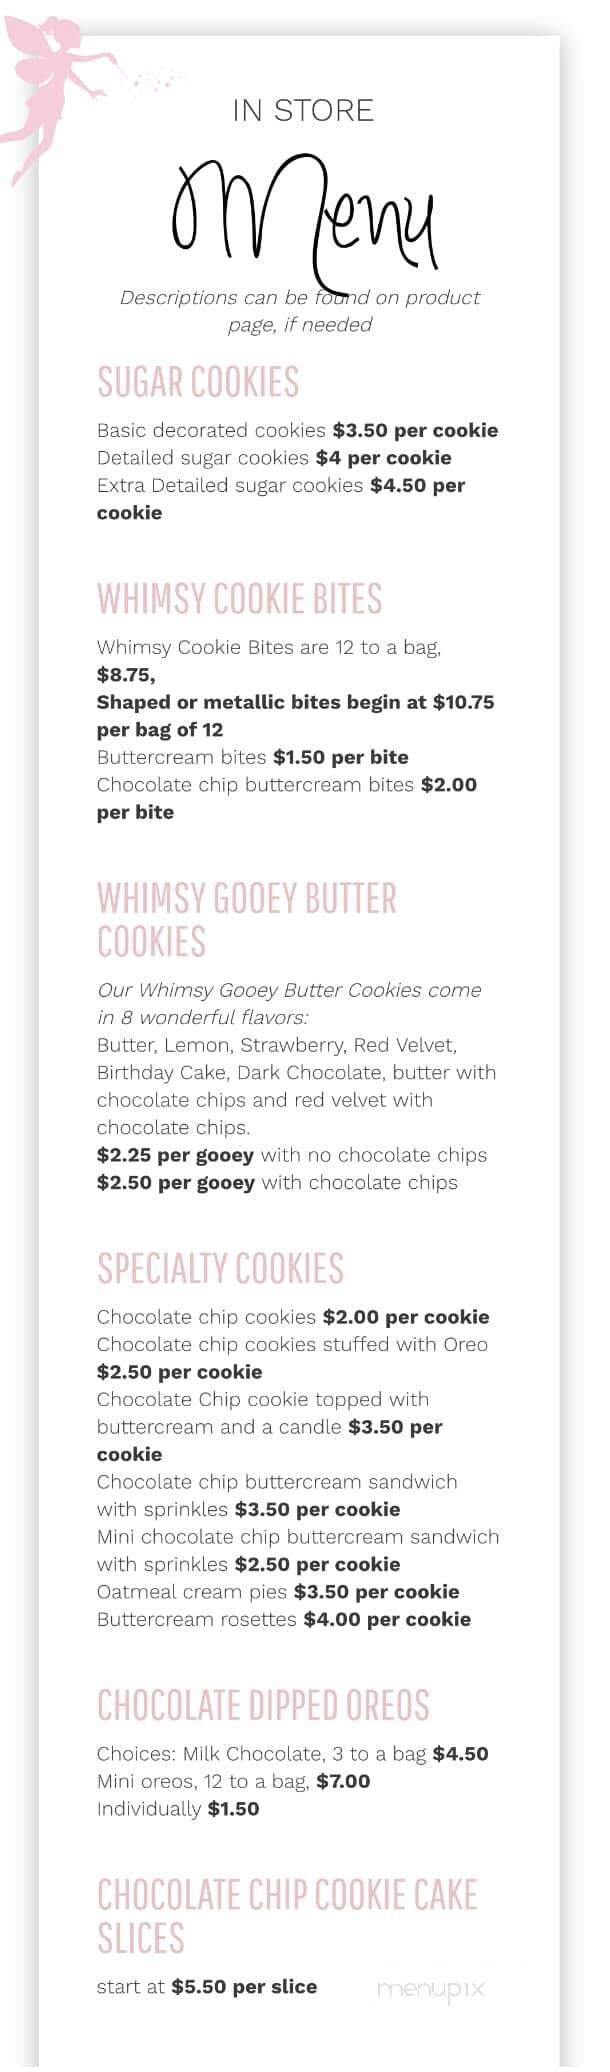 The Whimsy Cookie Company - Ridgeland, MS